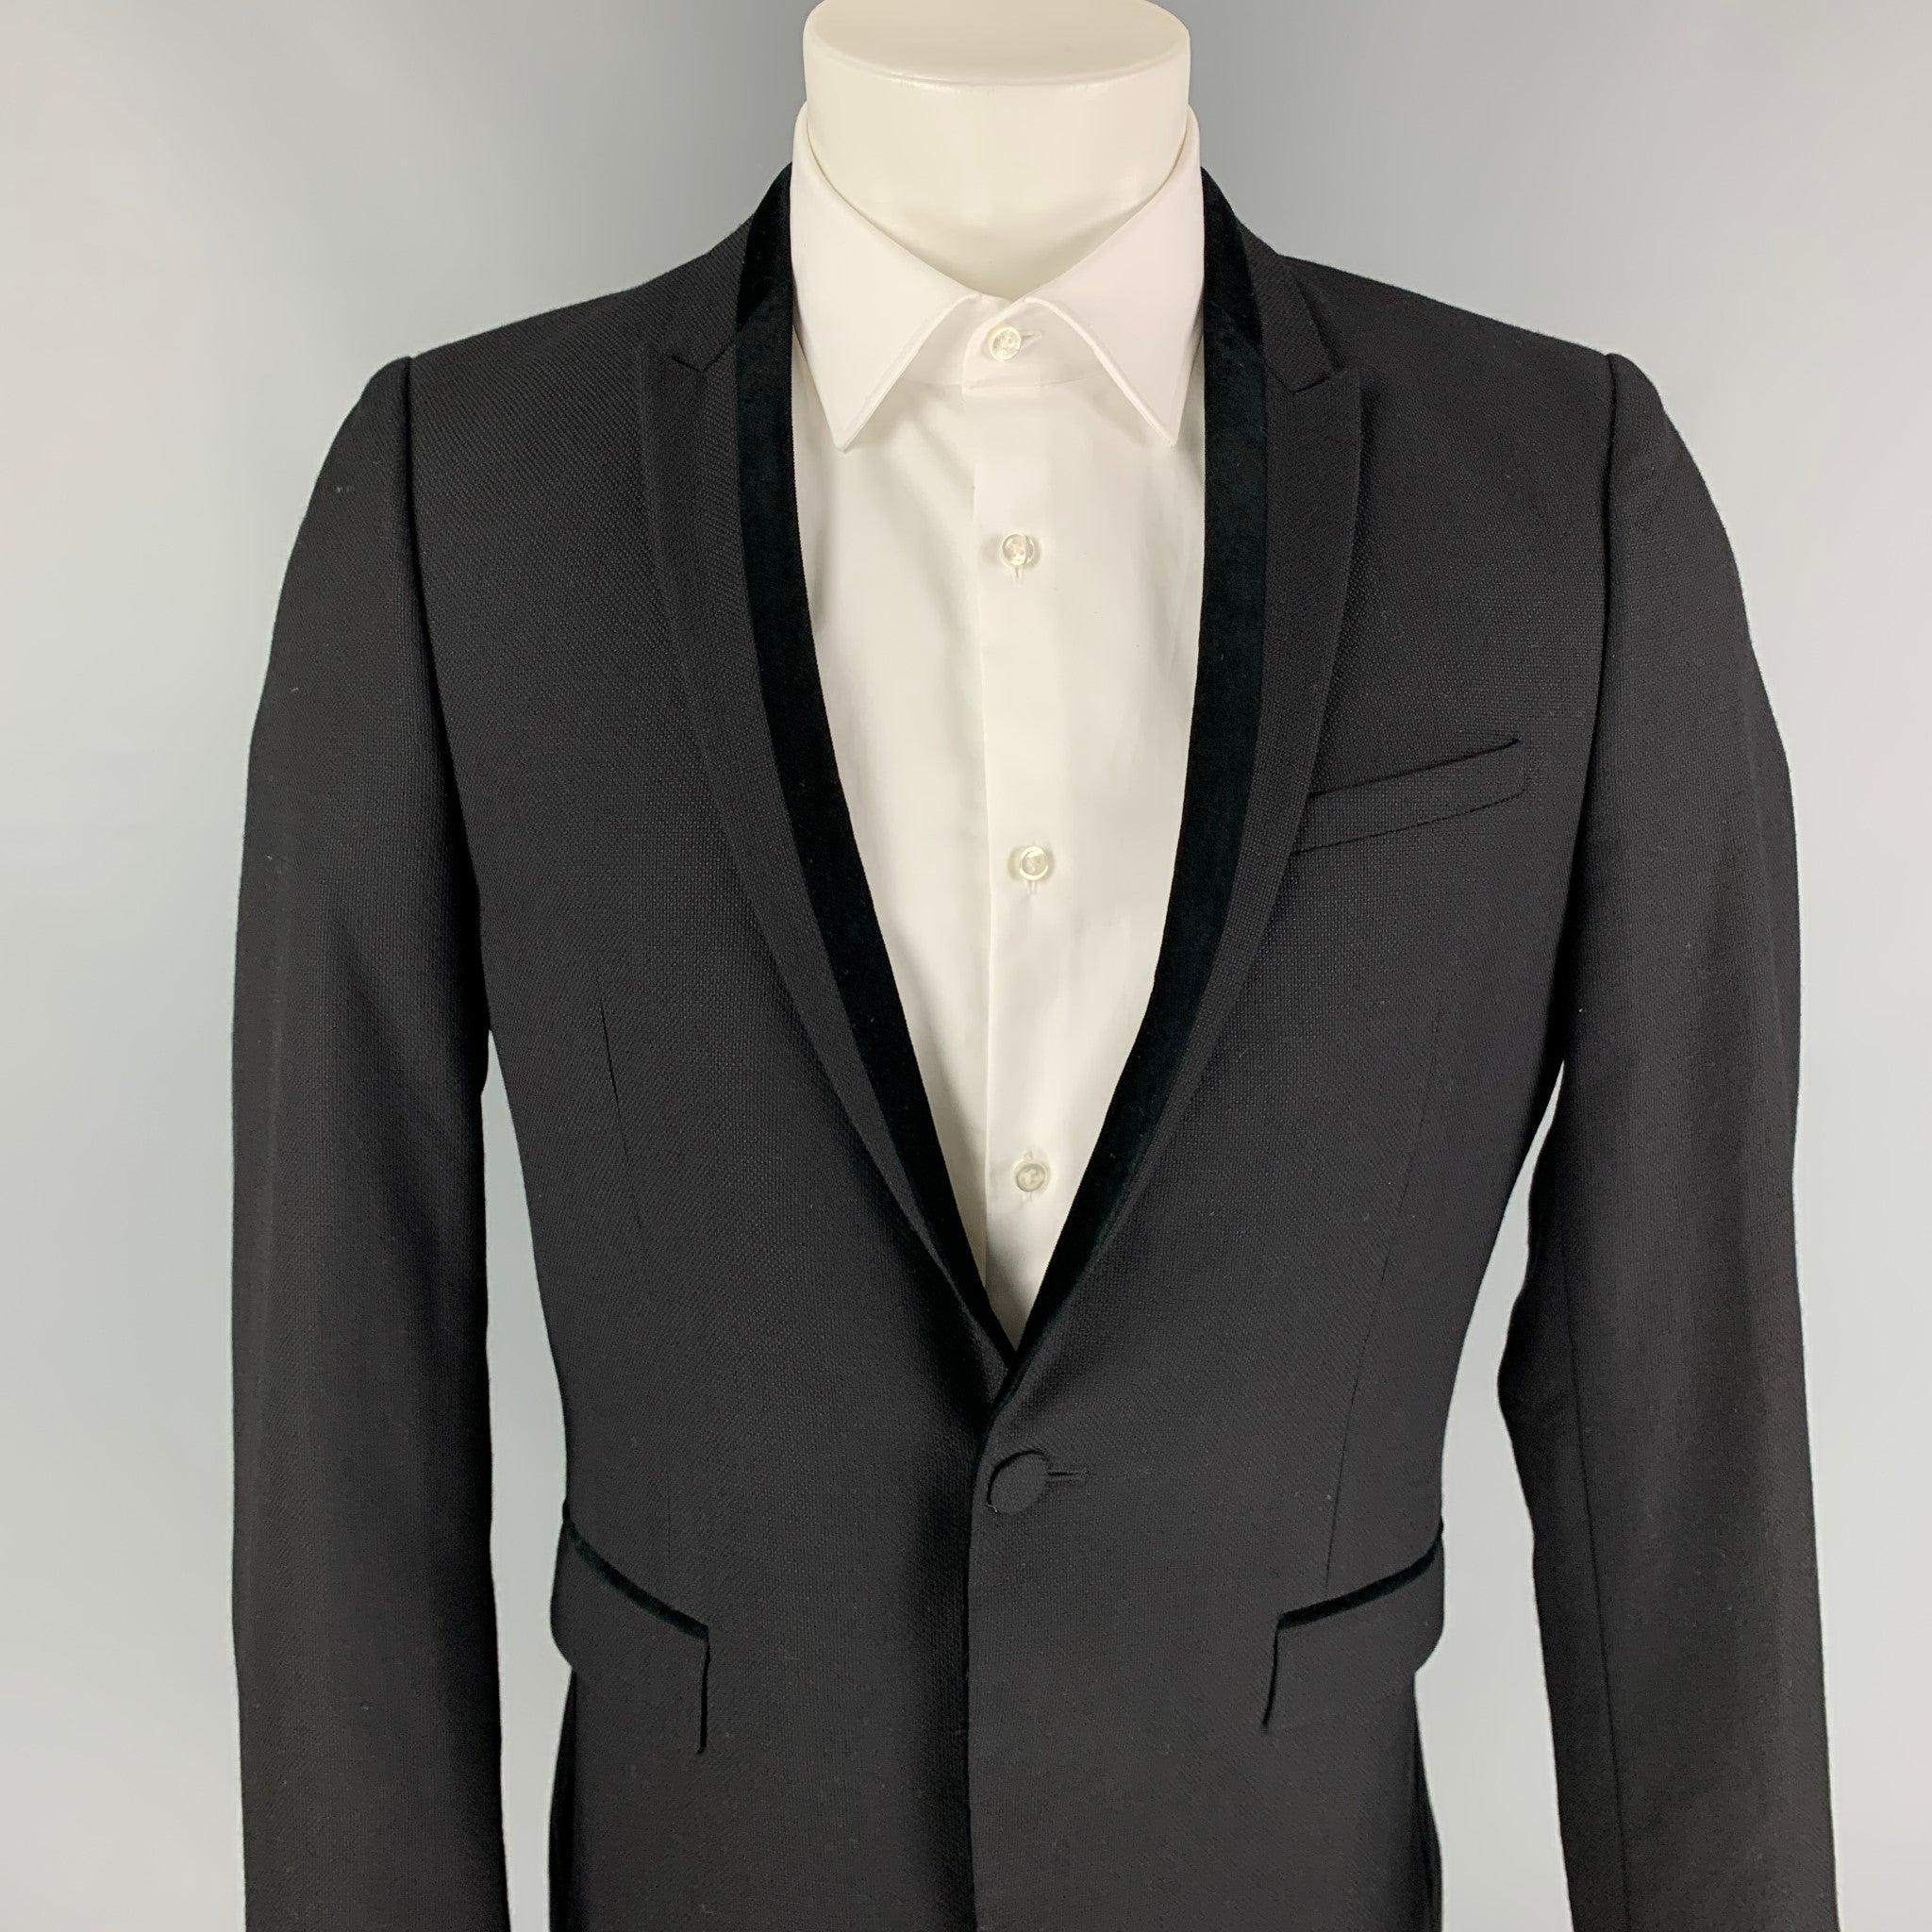 THE KOOPLES sport coat comes in a black woven wool with a full liner featuring a peak lapel, velvet trim, double back vent, flap pockets, and a single button closure.
Very Good
Pre-Owned Condition. 

Marked:   48  

Measurements: 
 
Shoulder: 17